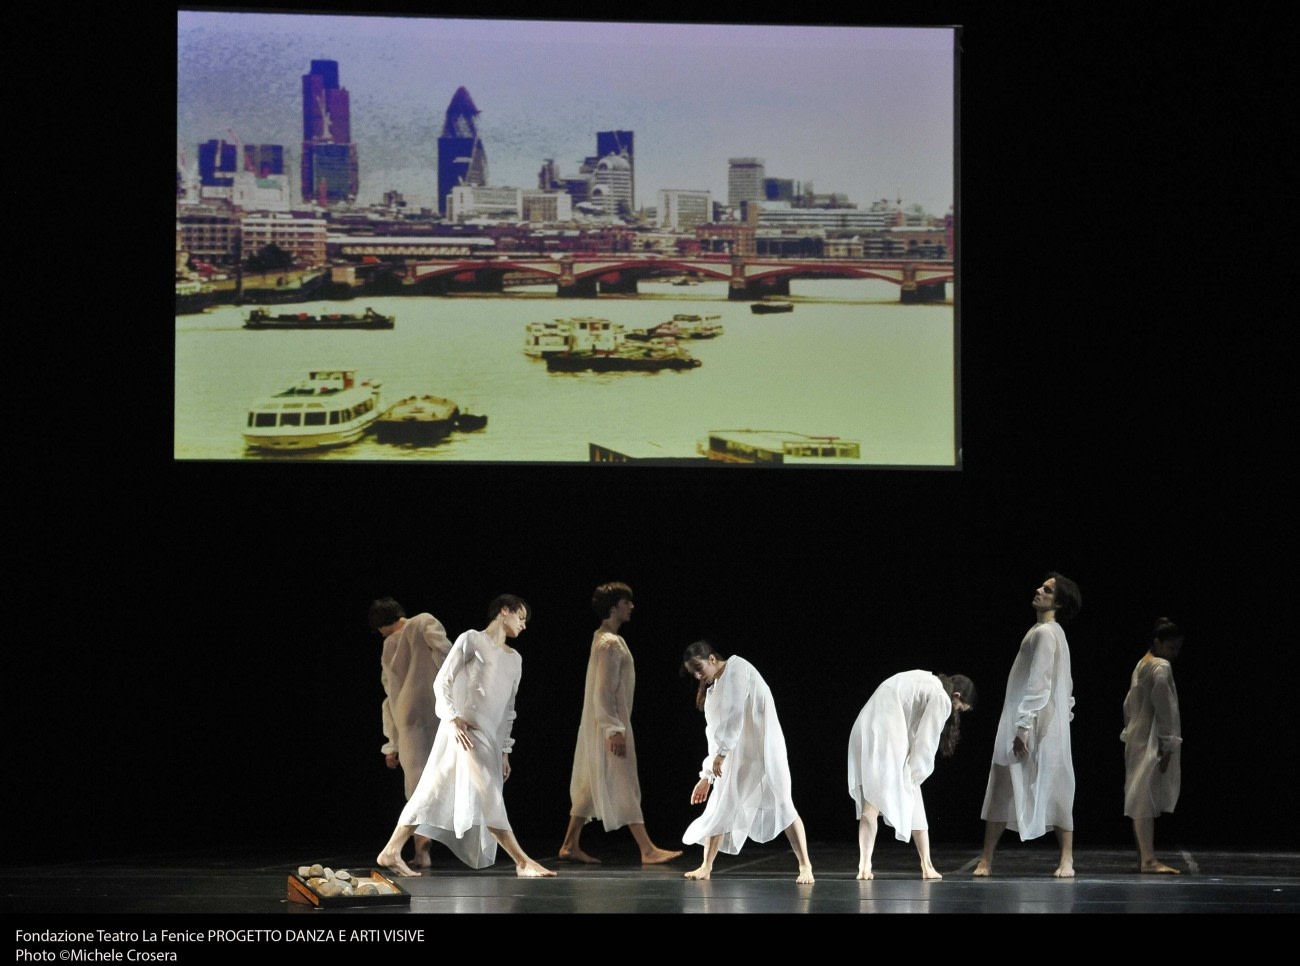 Dungeness Redux. Teatro La Fenice, Venice, 2014  Film installation by Isaac Julien and choreography by Patrick Eberts